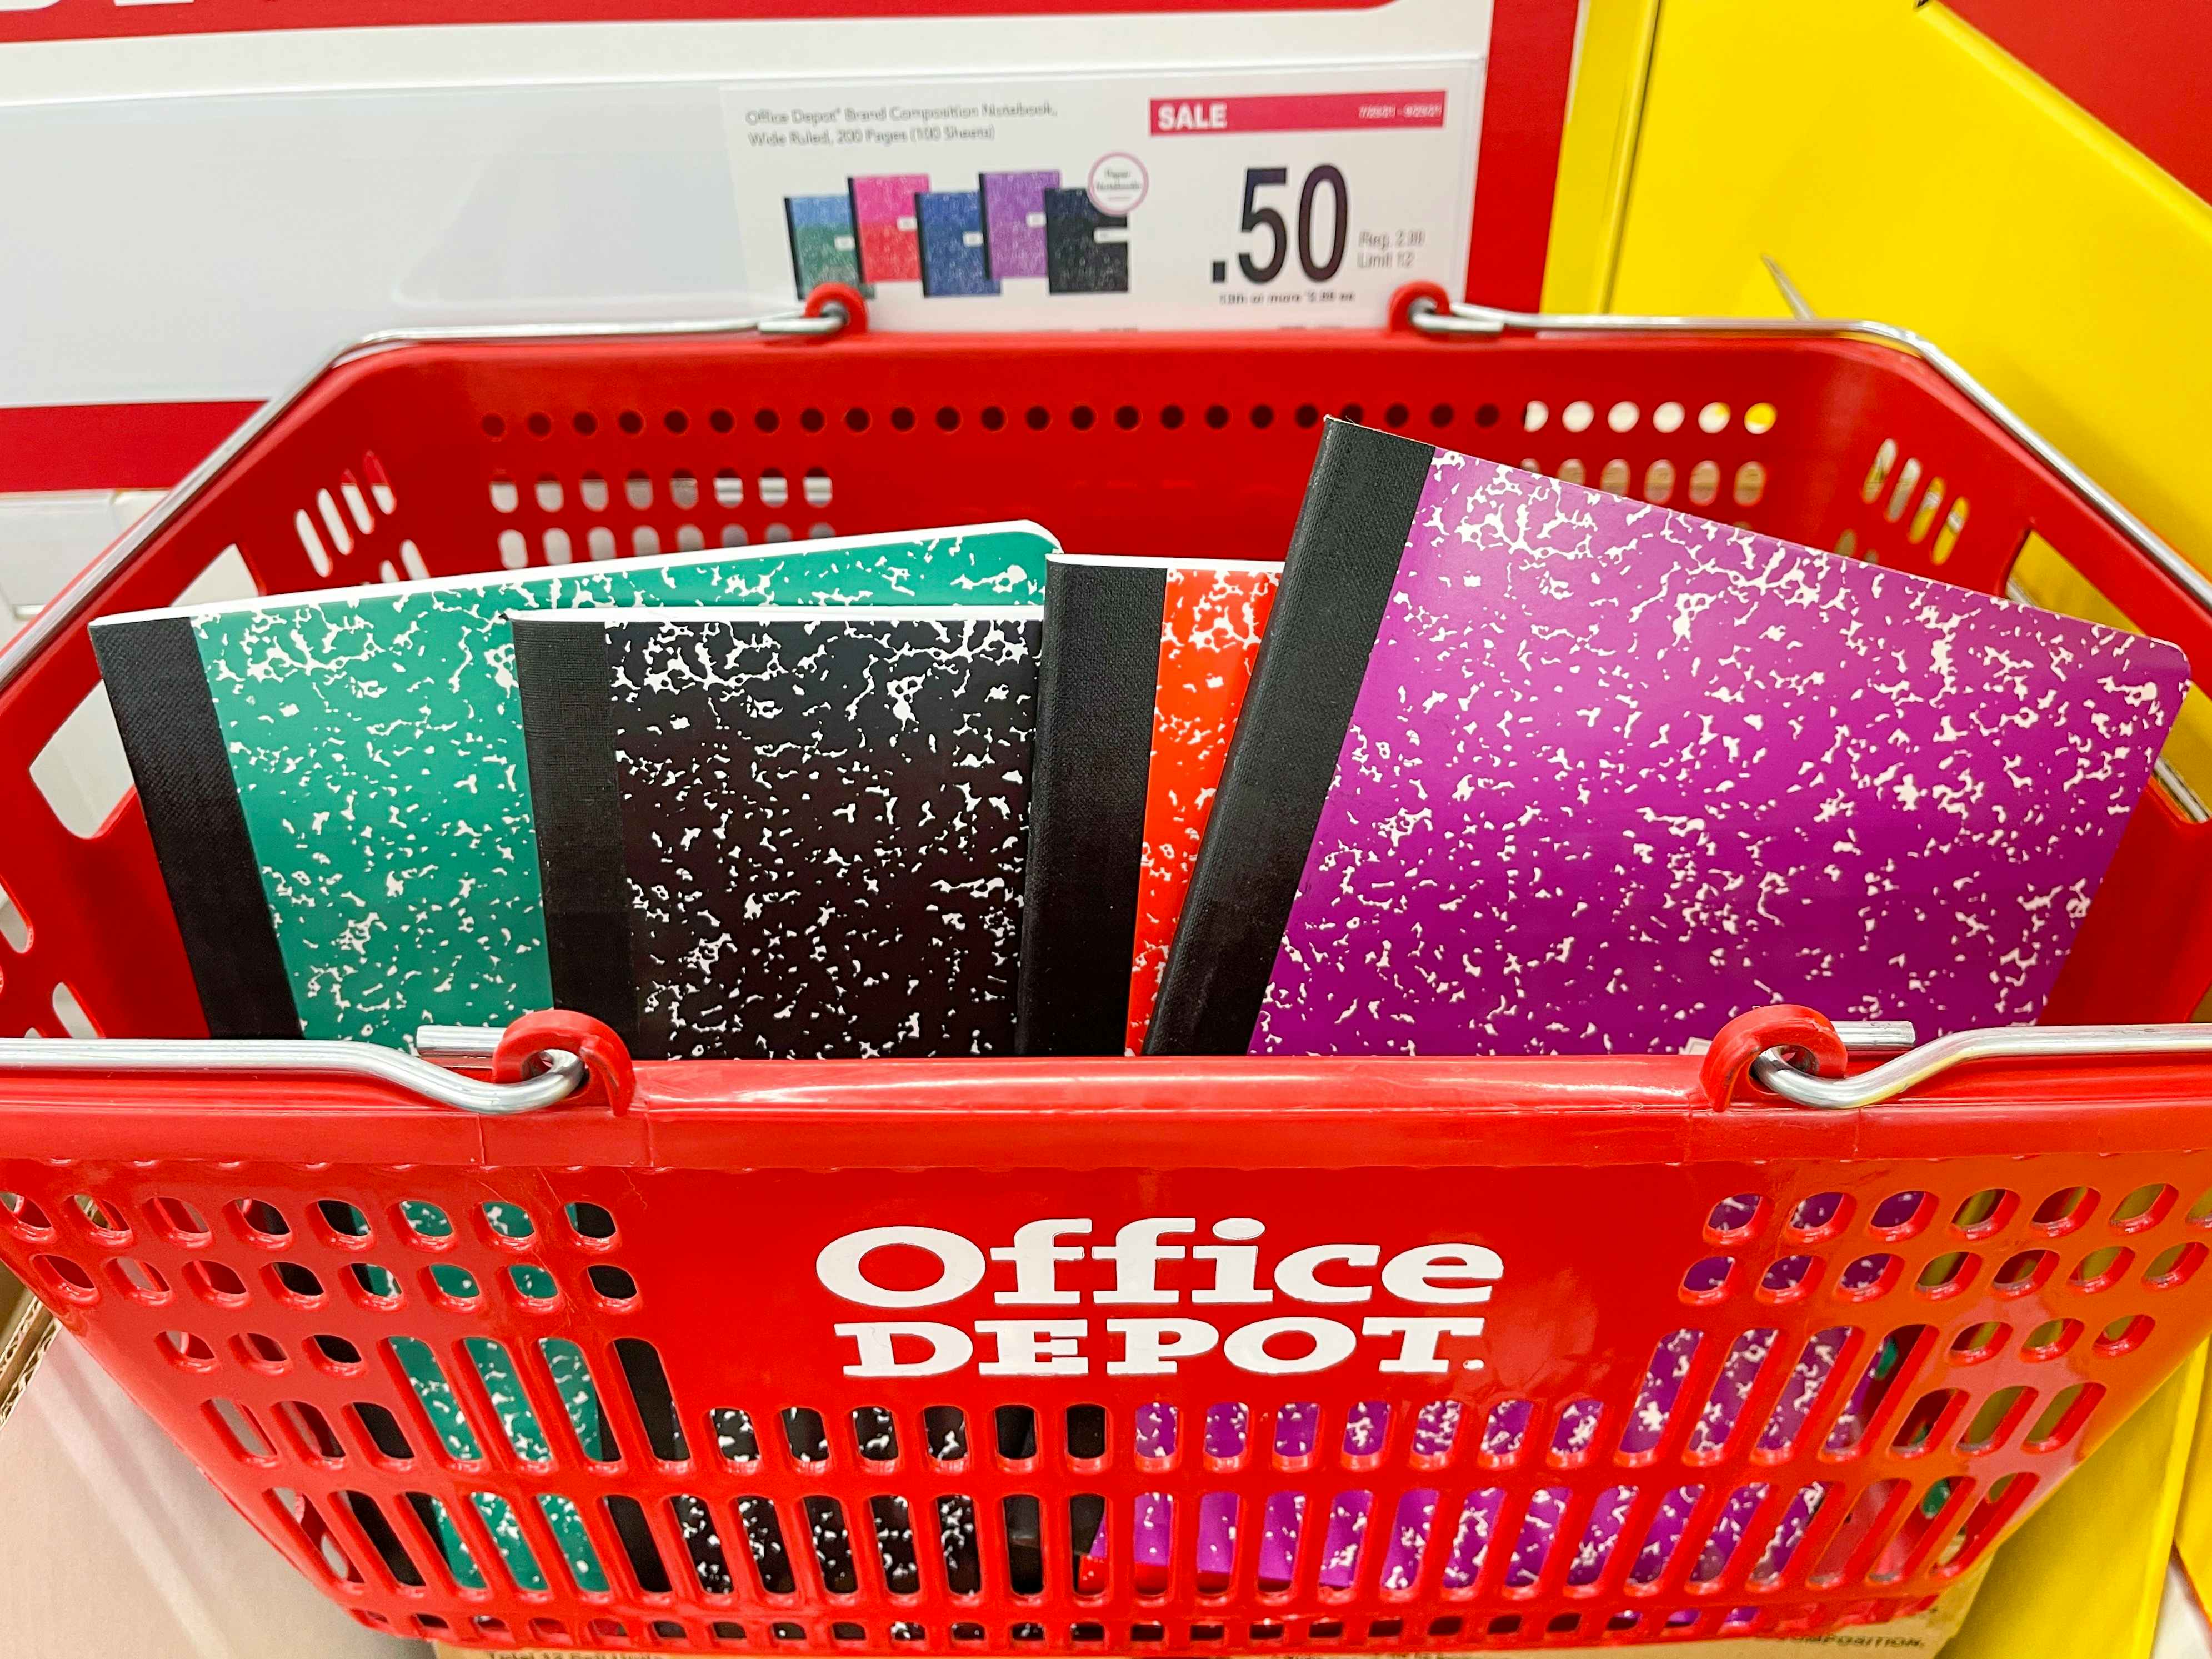 A red office depot basket full of notebooks.